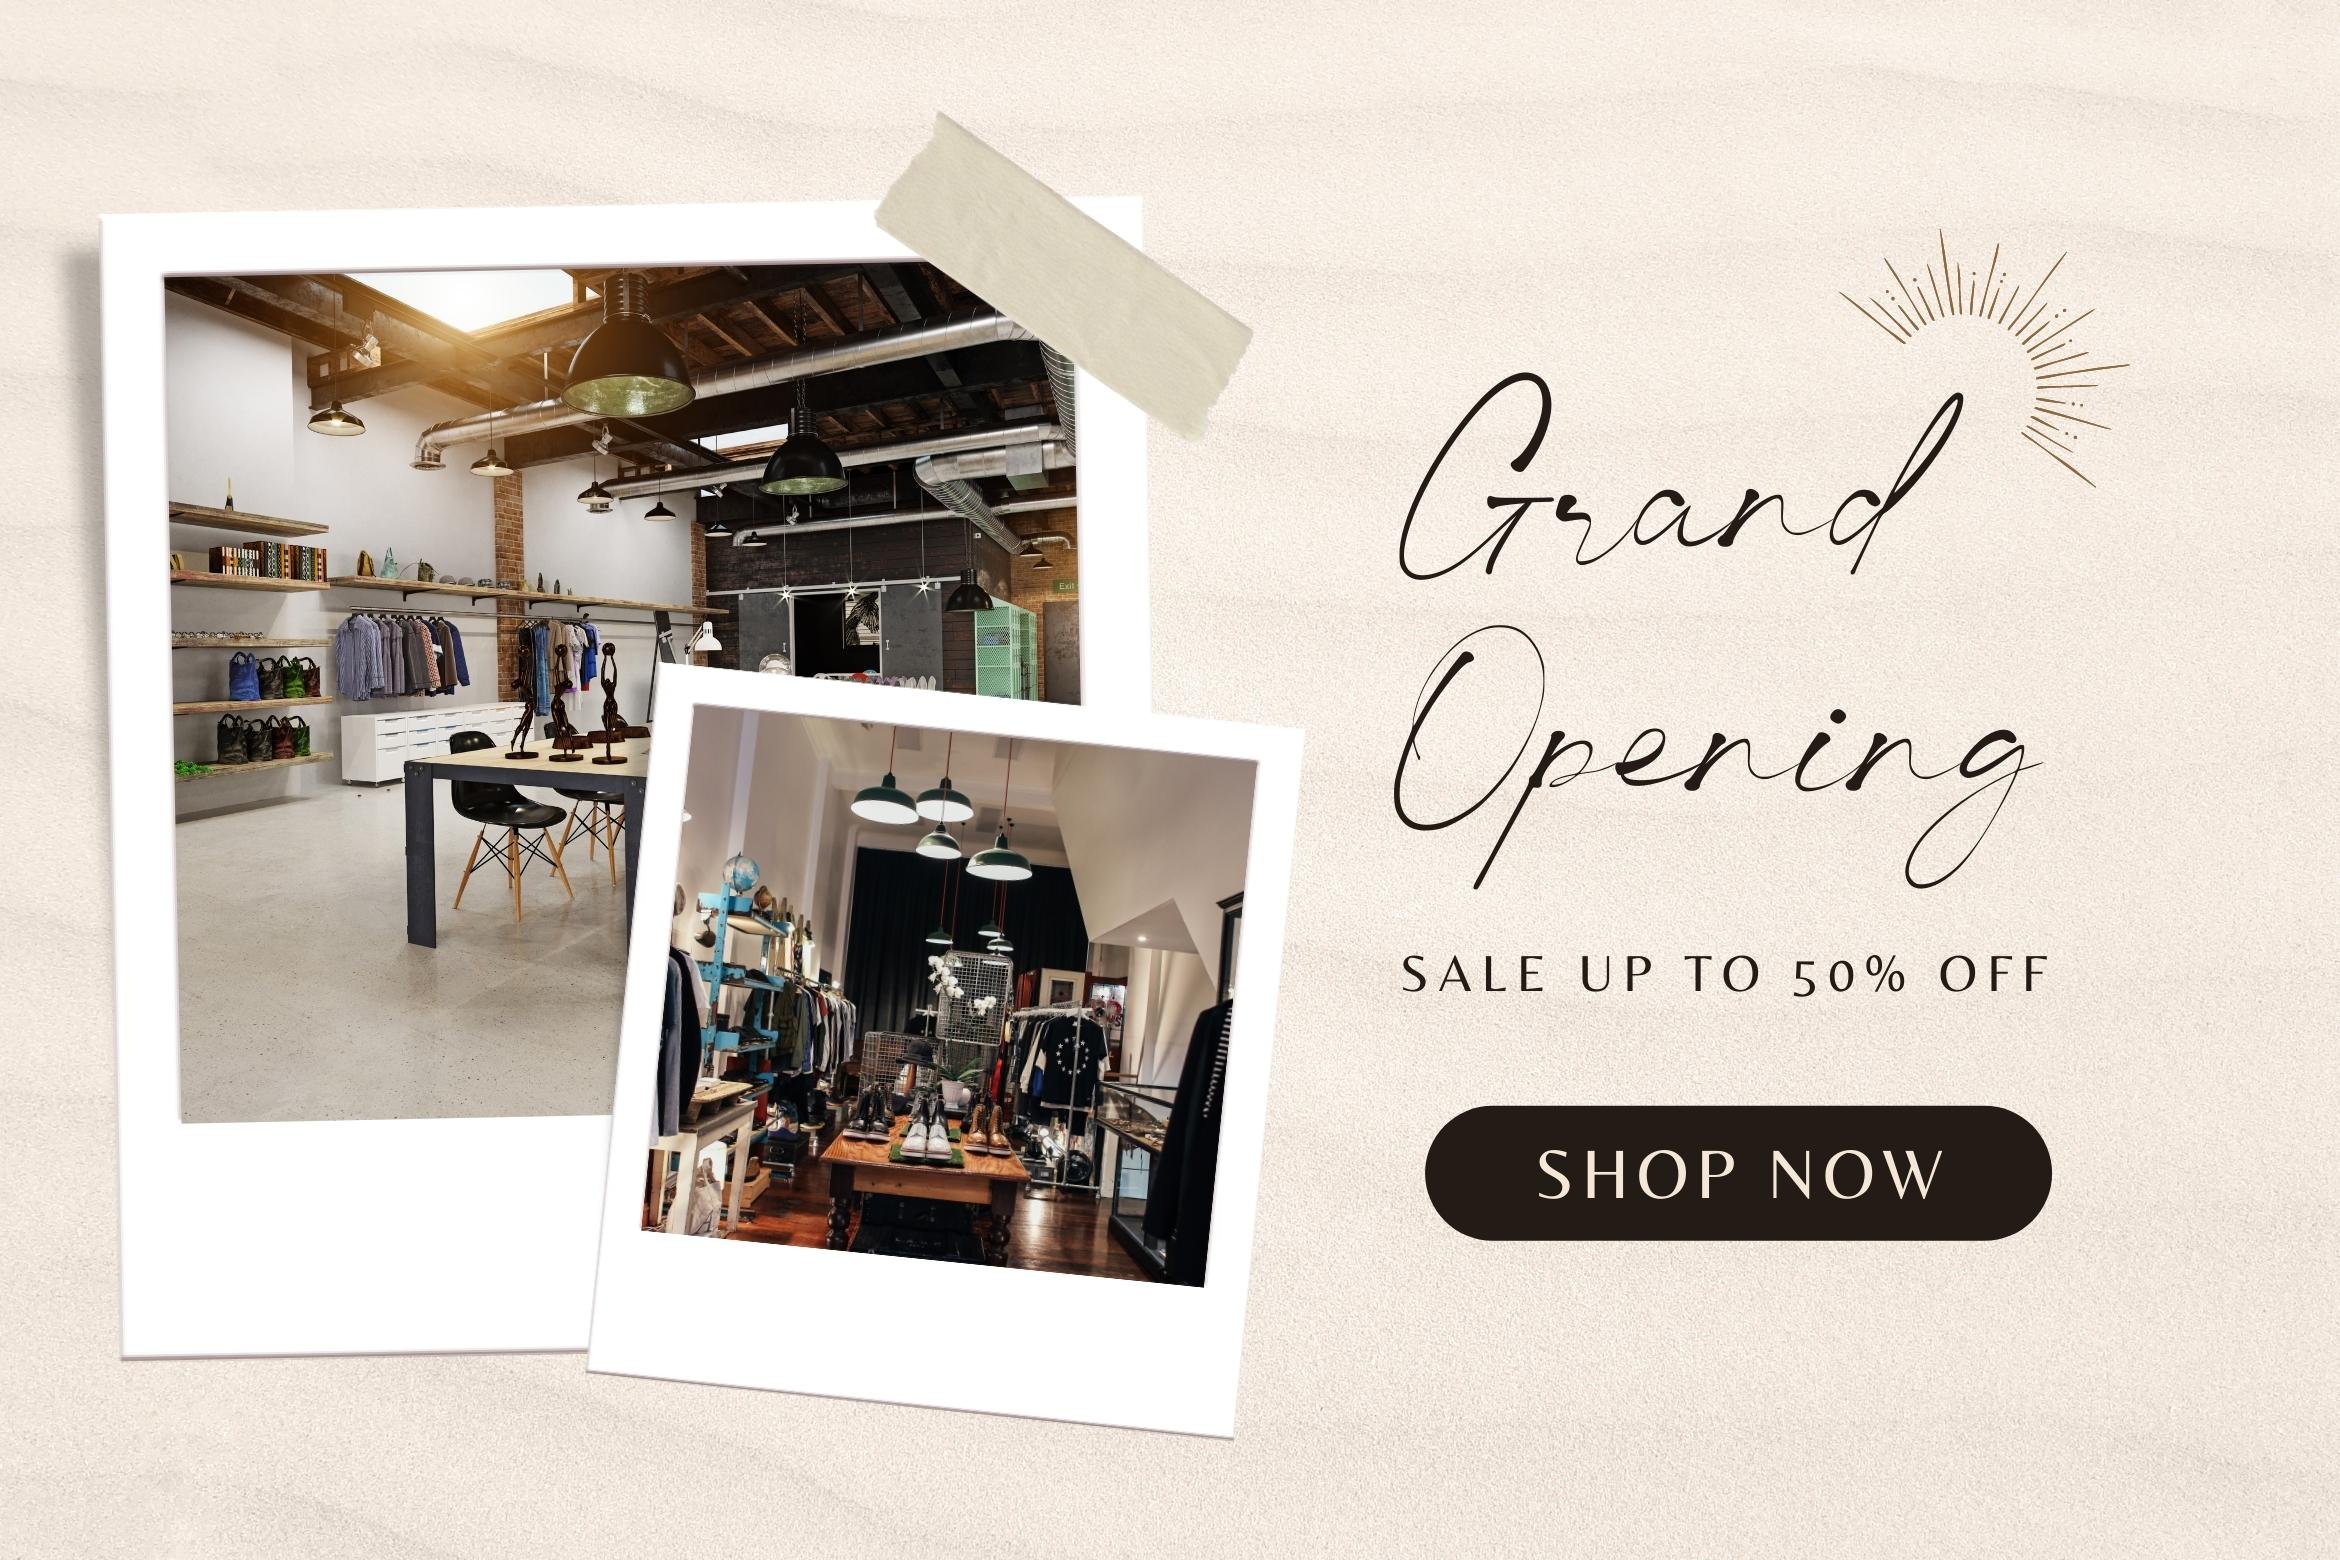 A picture of a store with the words grand opening sale up to 50 % off.